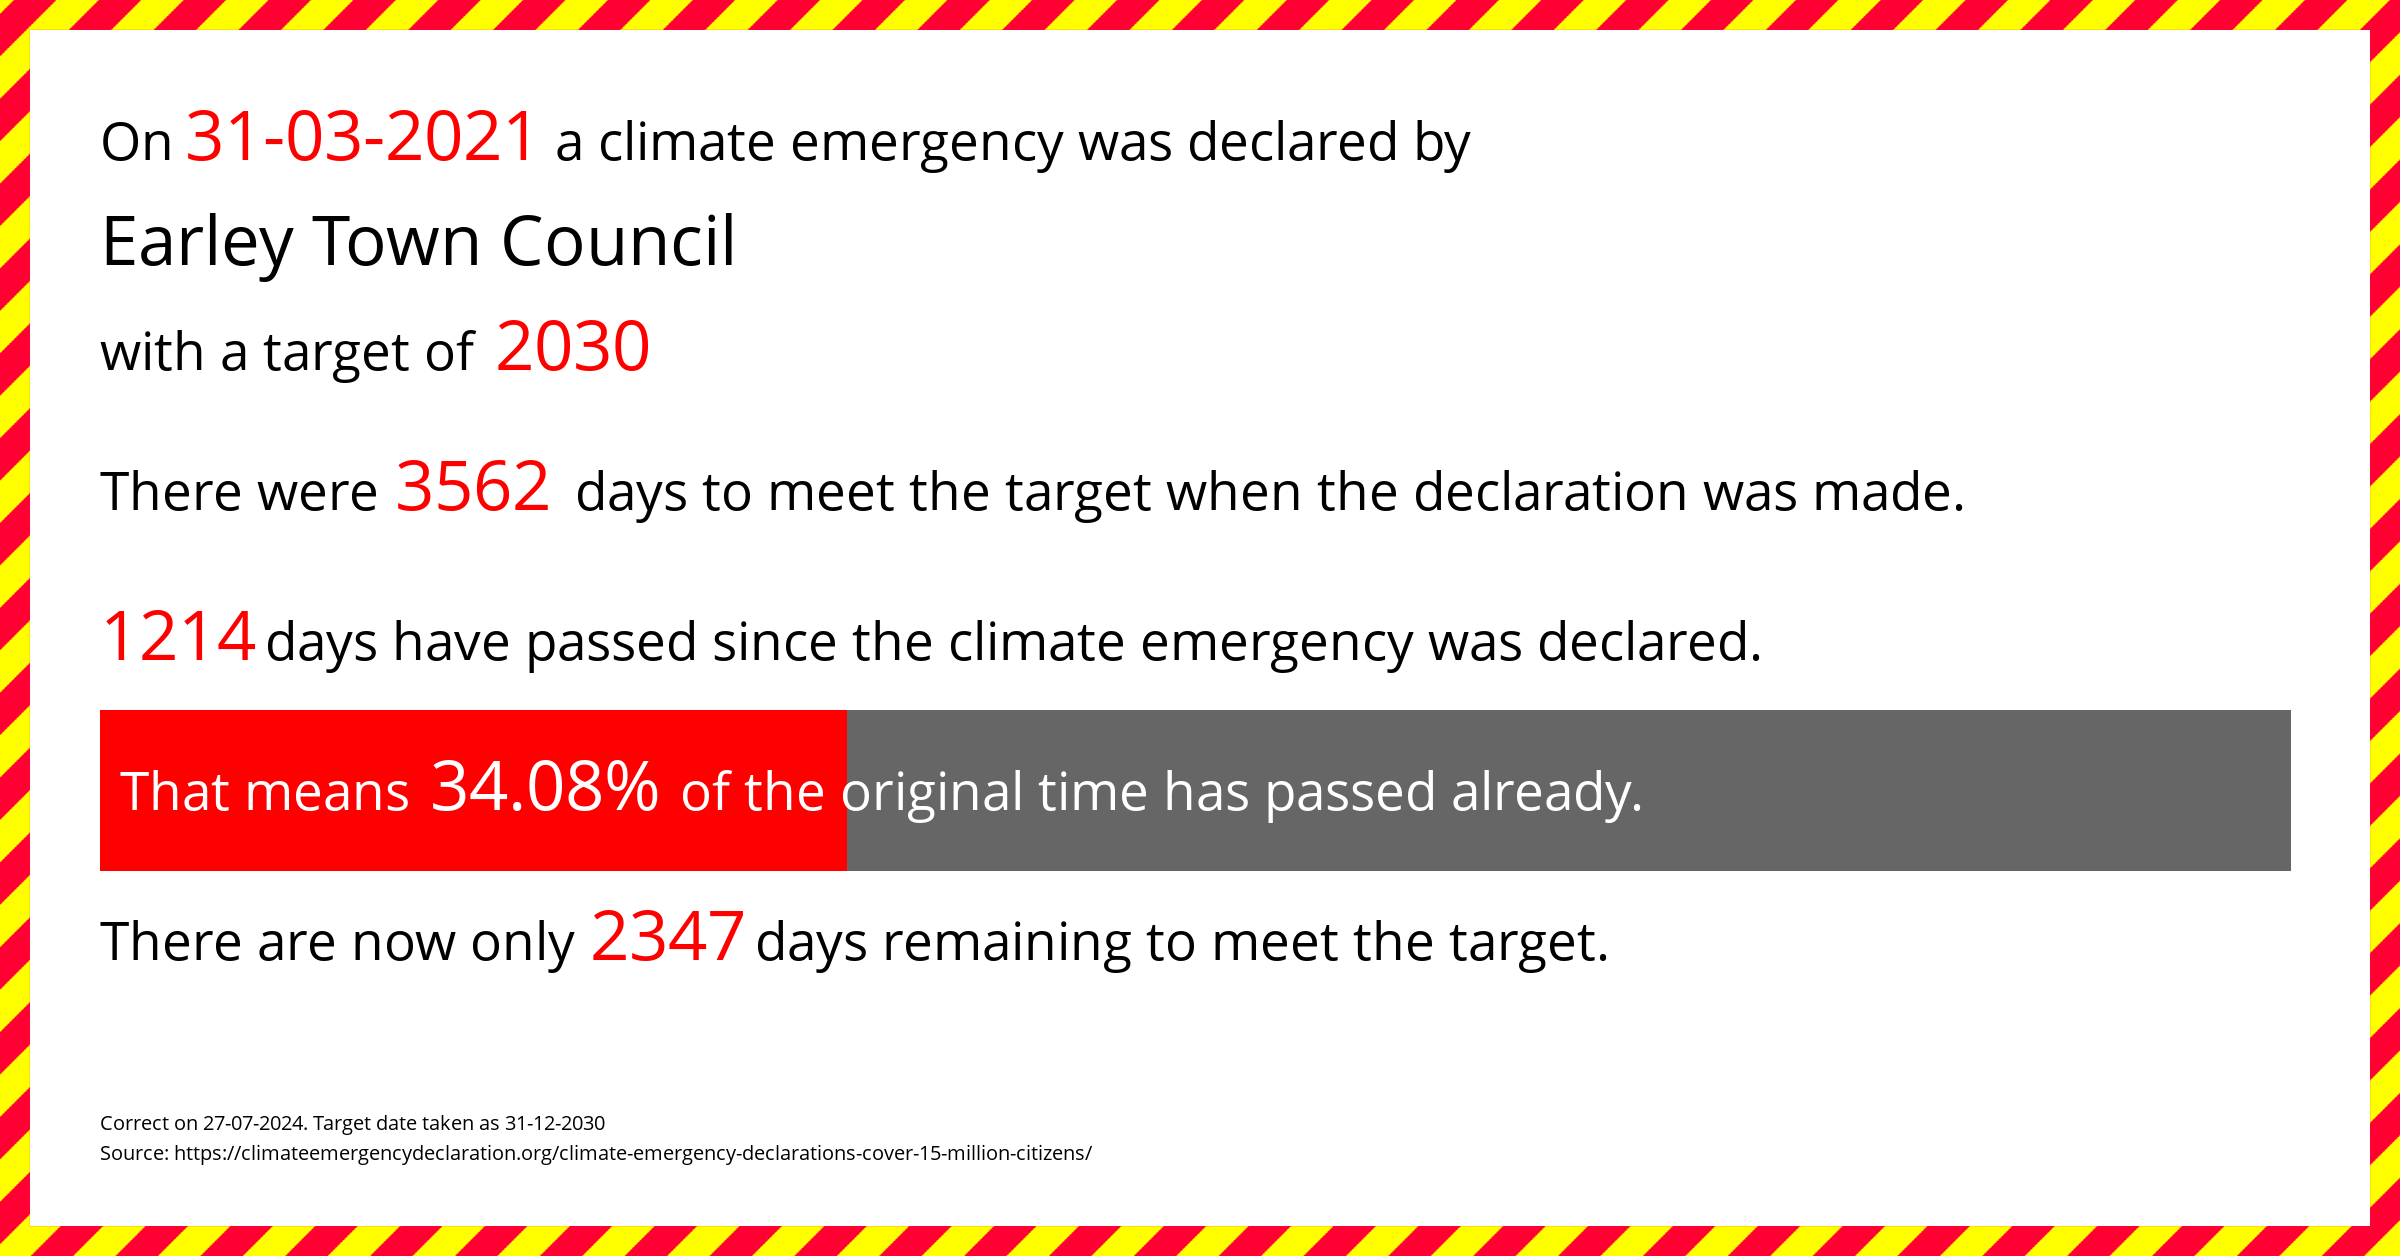 Earley Town Council  declared a Climate emergency on Wednesday 31st March 2021, with a target of 2030.